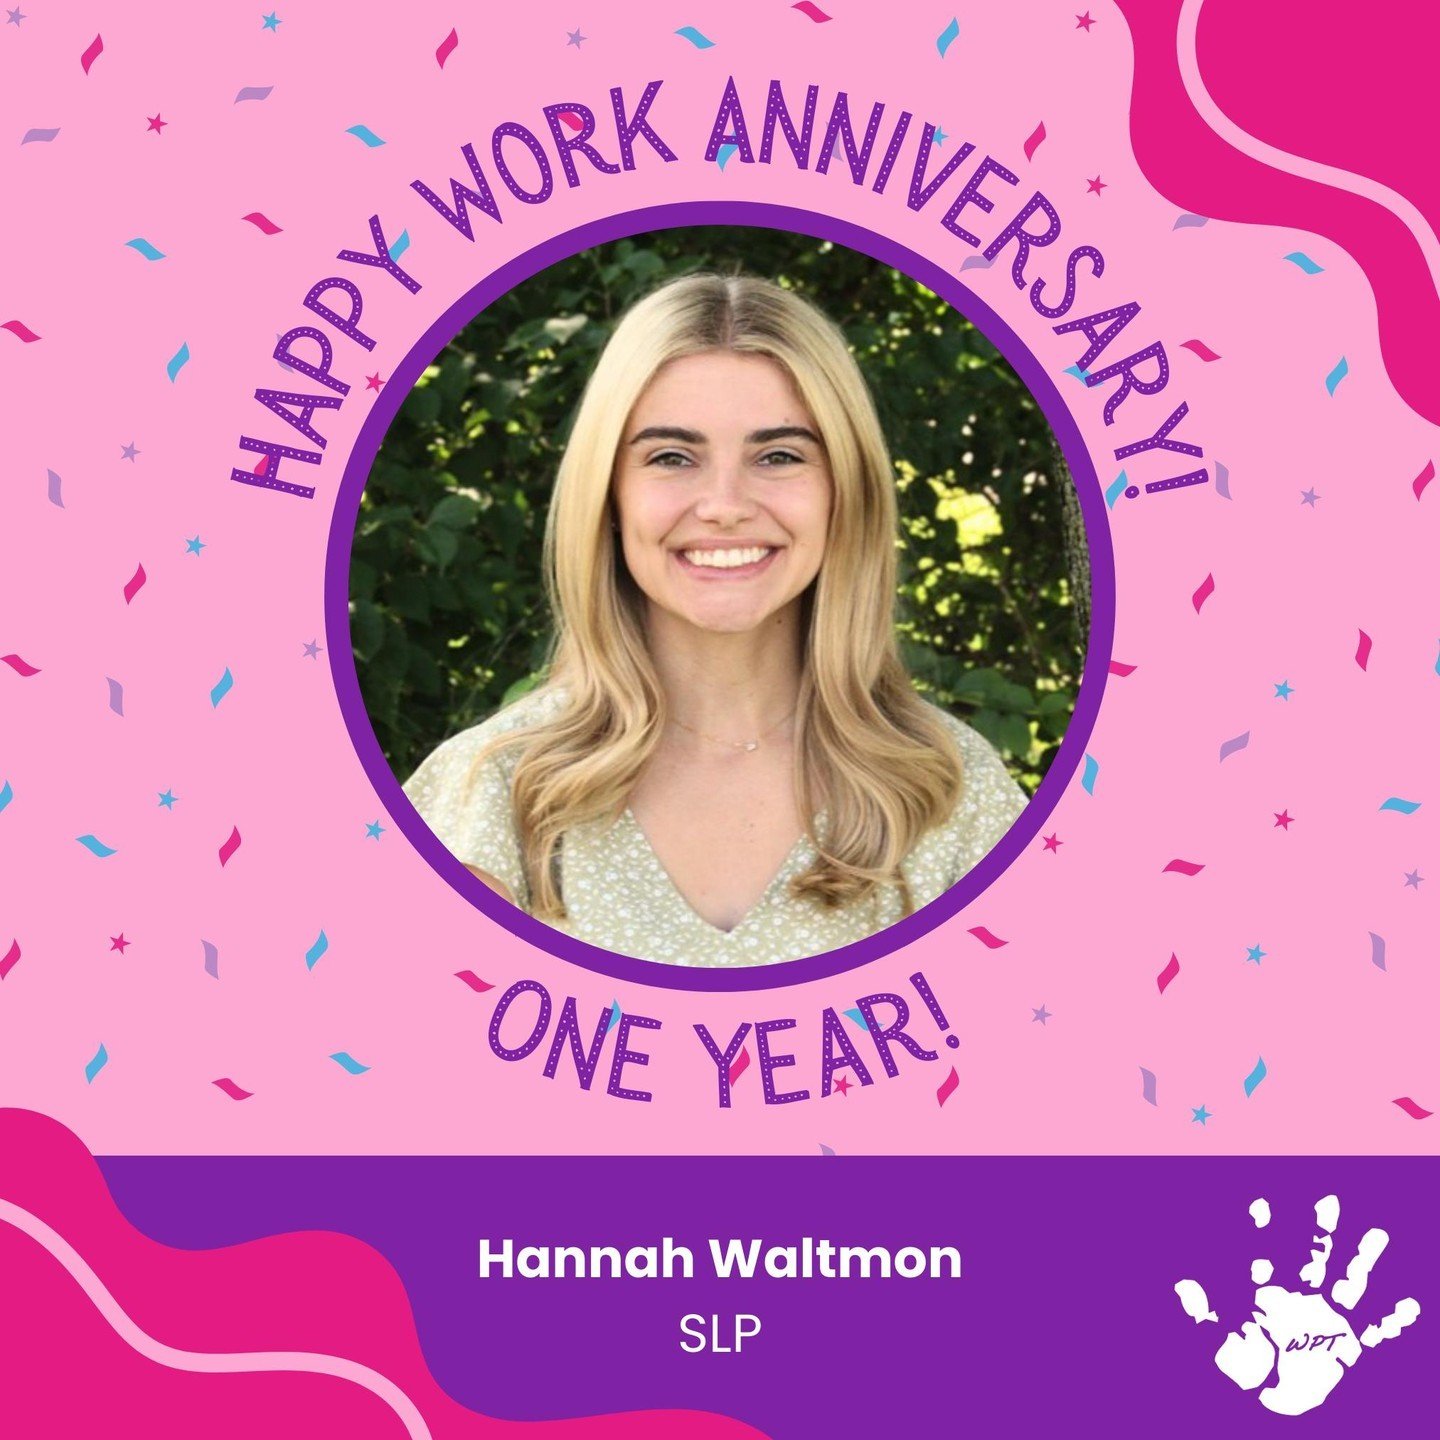 Happy WPT Work Anniversary, Hannah!🥳🎊 Thank you for your year of hard work and dedication to our clinic!  We appreciate all you do for us each and every day!💗

#WilsonPediatricTherapy #WPT #Workaversary #WorkAnniversary #OneYear #Thankful #Awesome